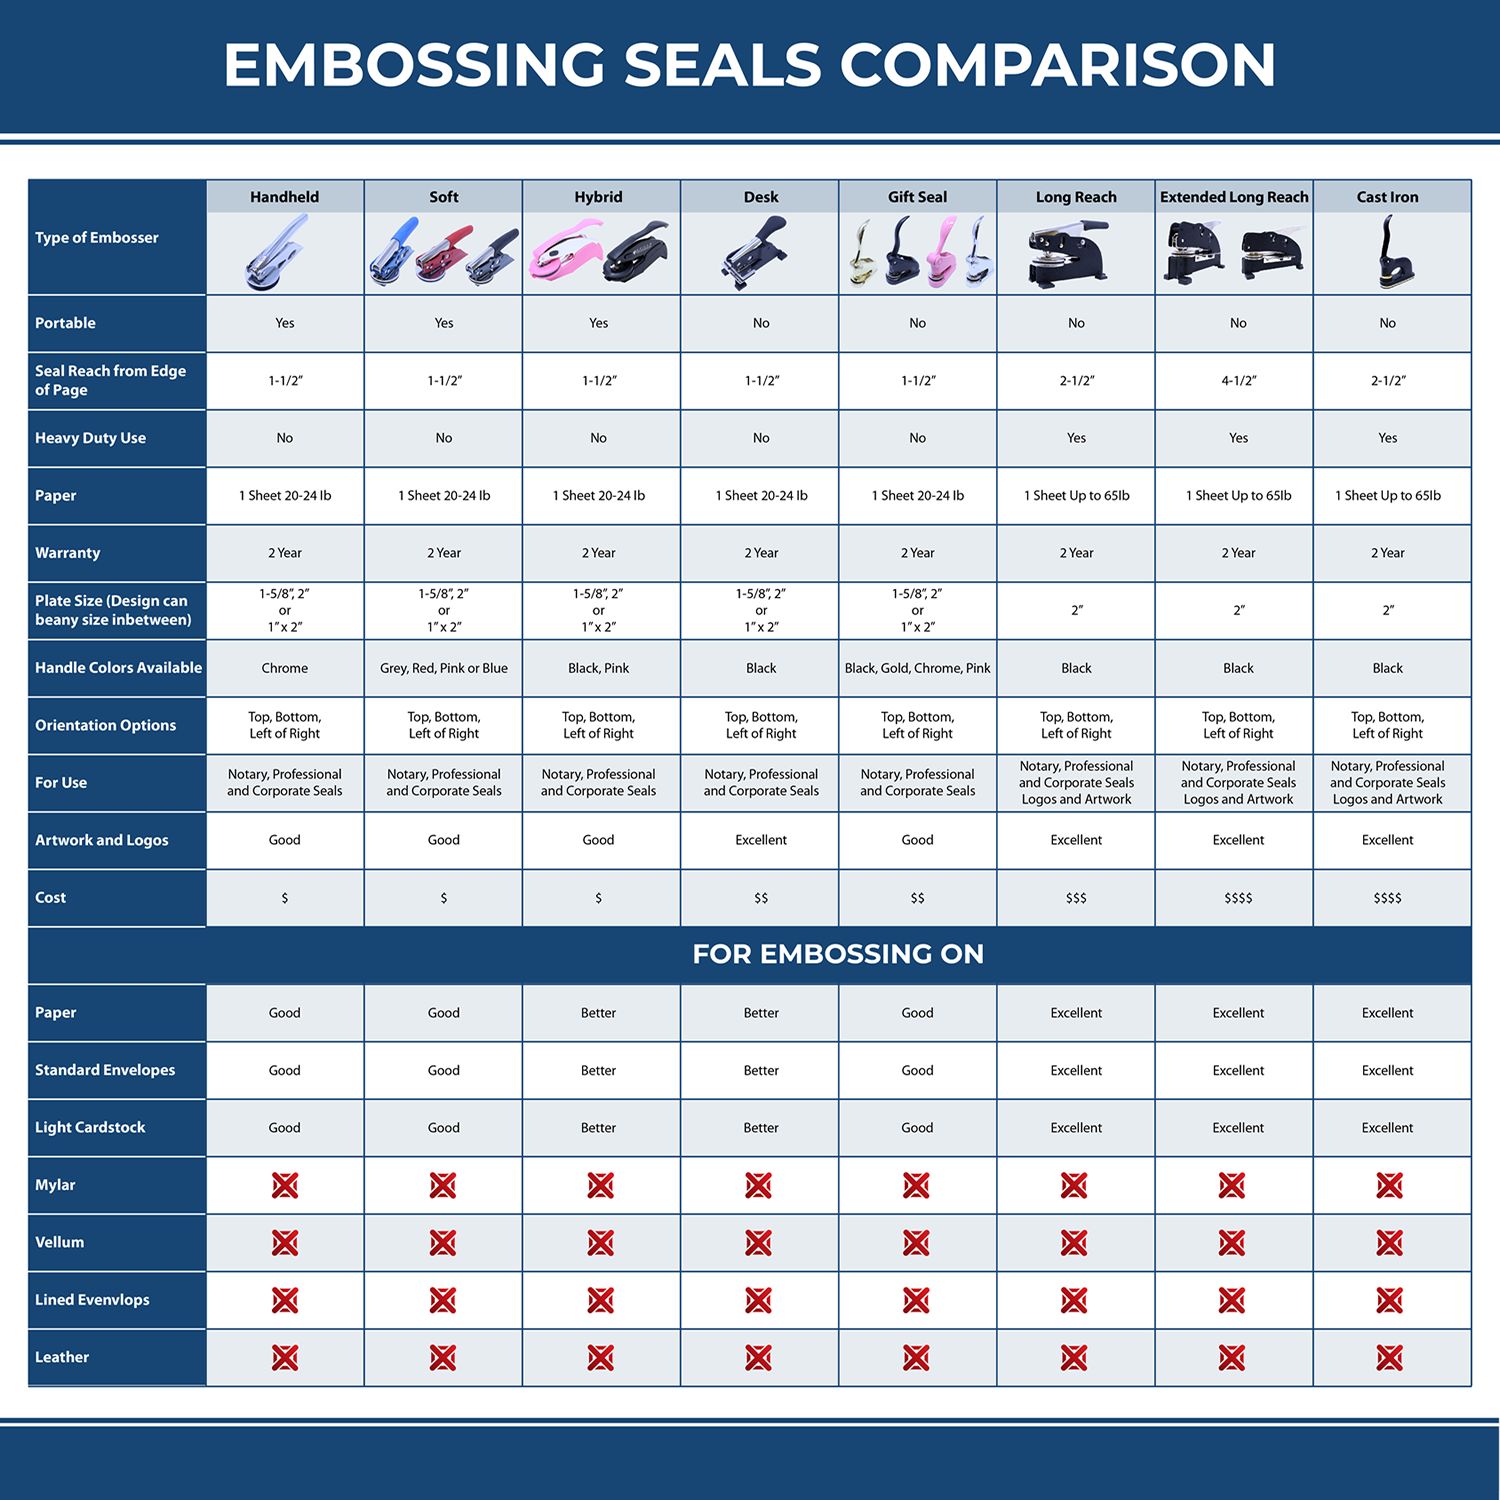 A comparison chart for the different types of mount models available for the Virginia Desk Surveyor Seal Embosser.